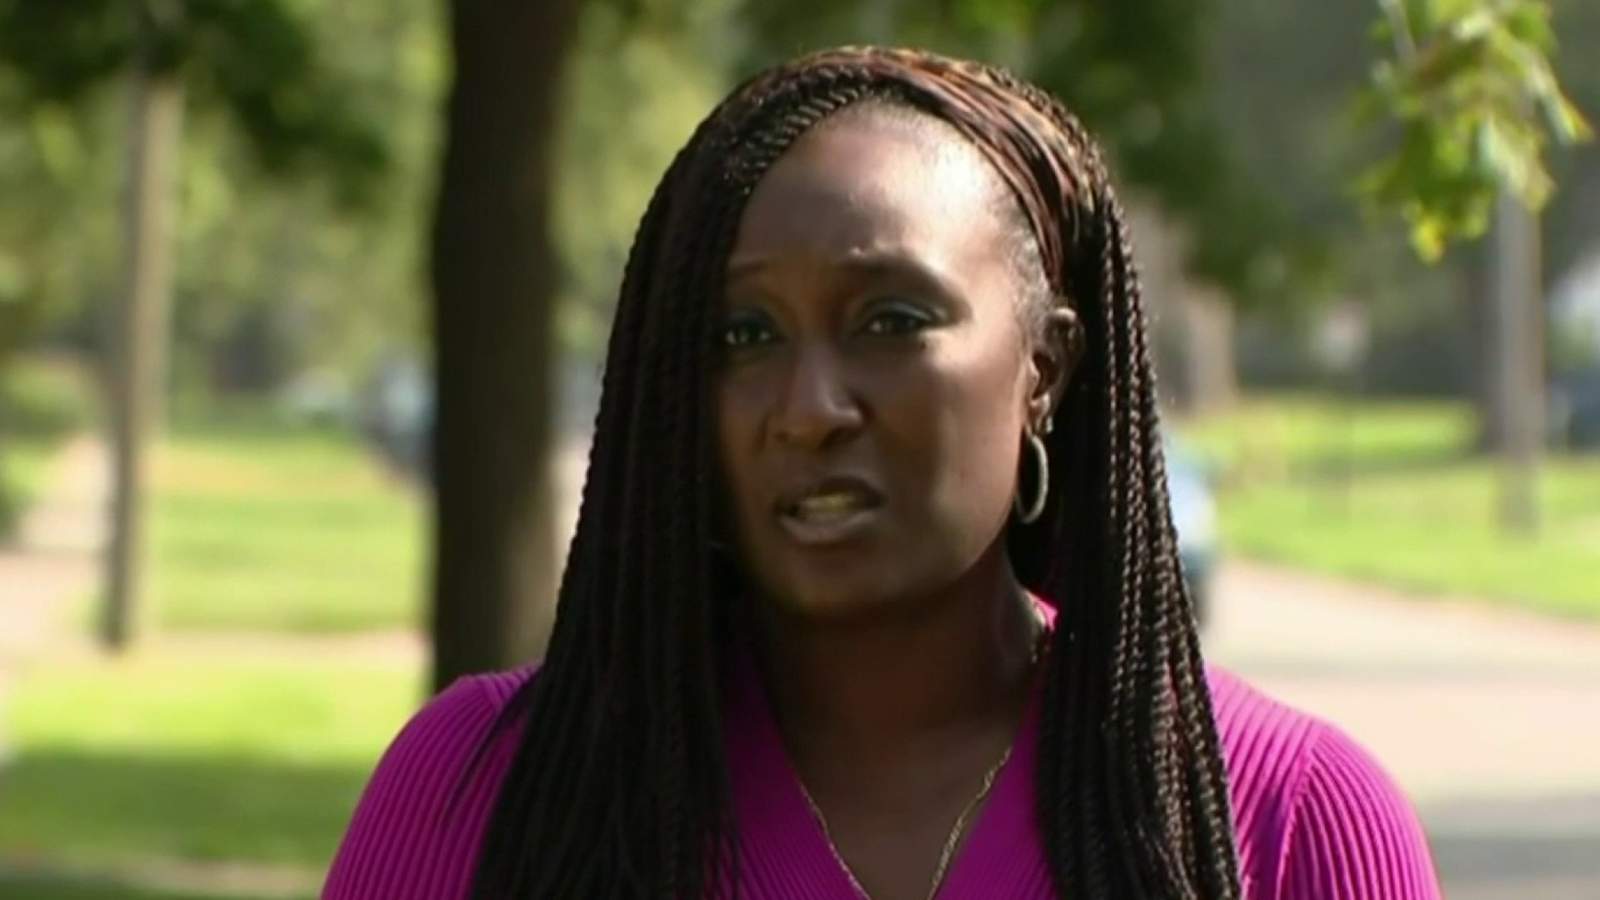 Hear from mother targeted with violent, racial threats by man she met through Taylor church program